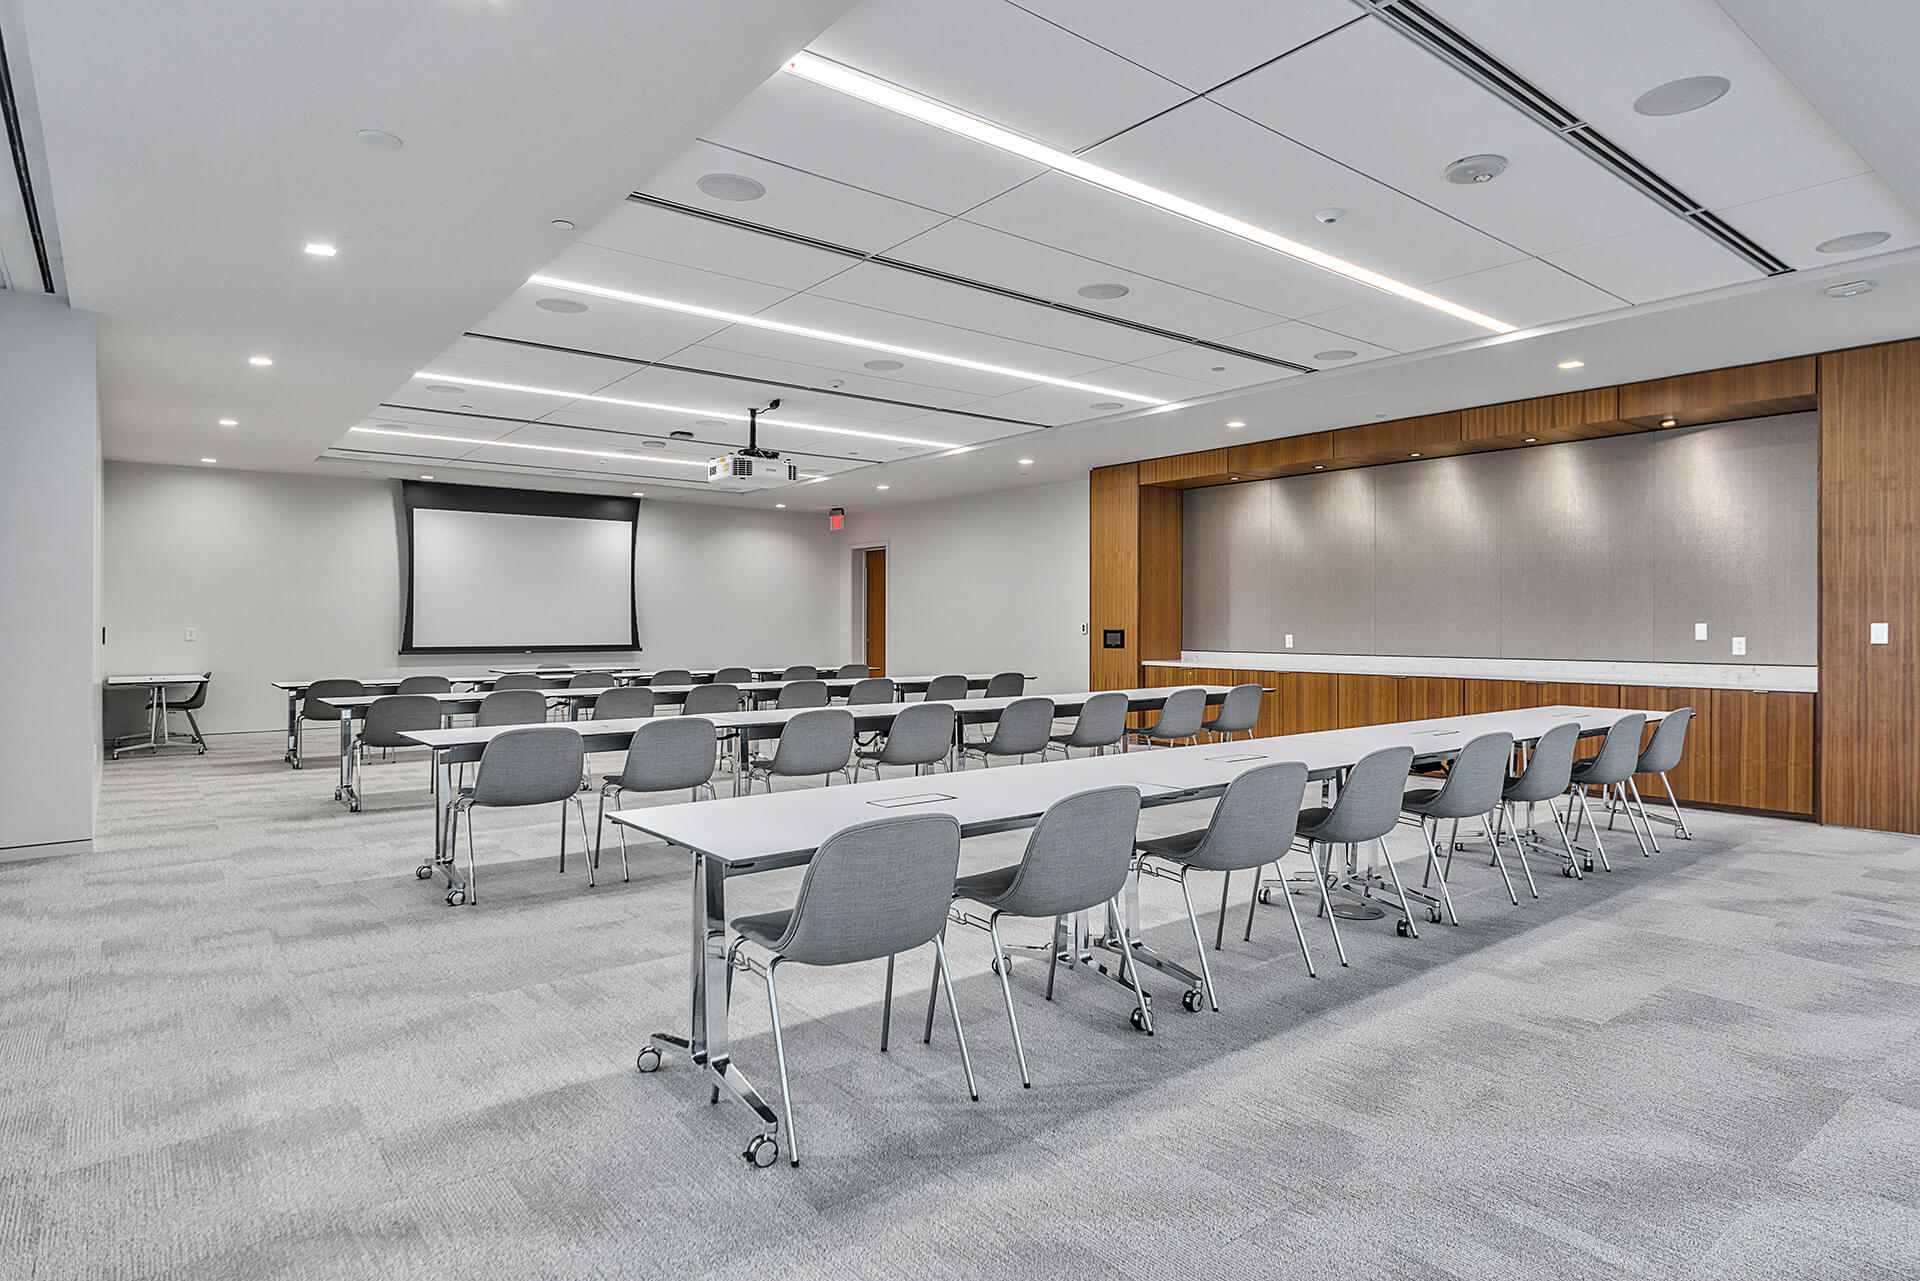 Large meeting room with several tables and chairs facing projector screen